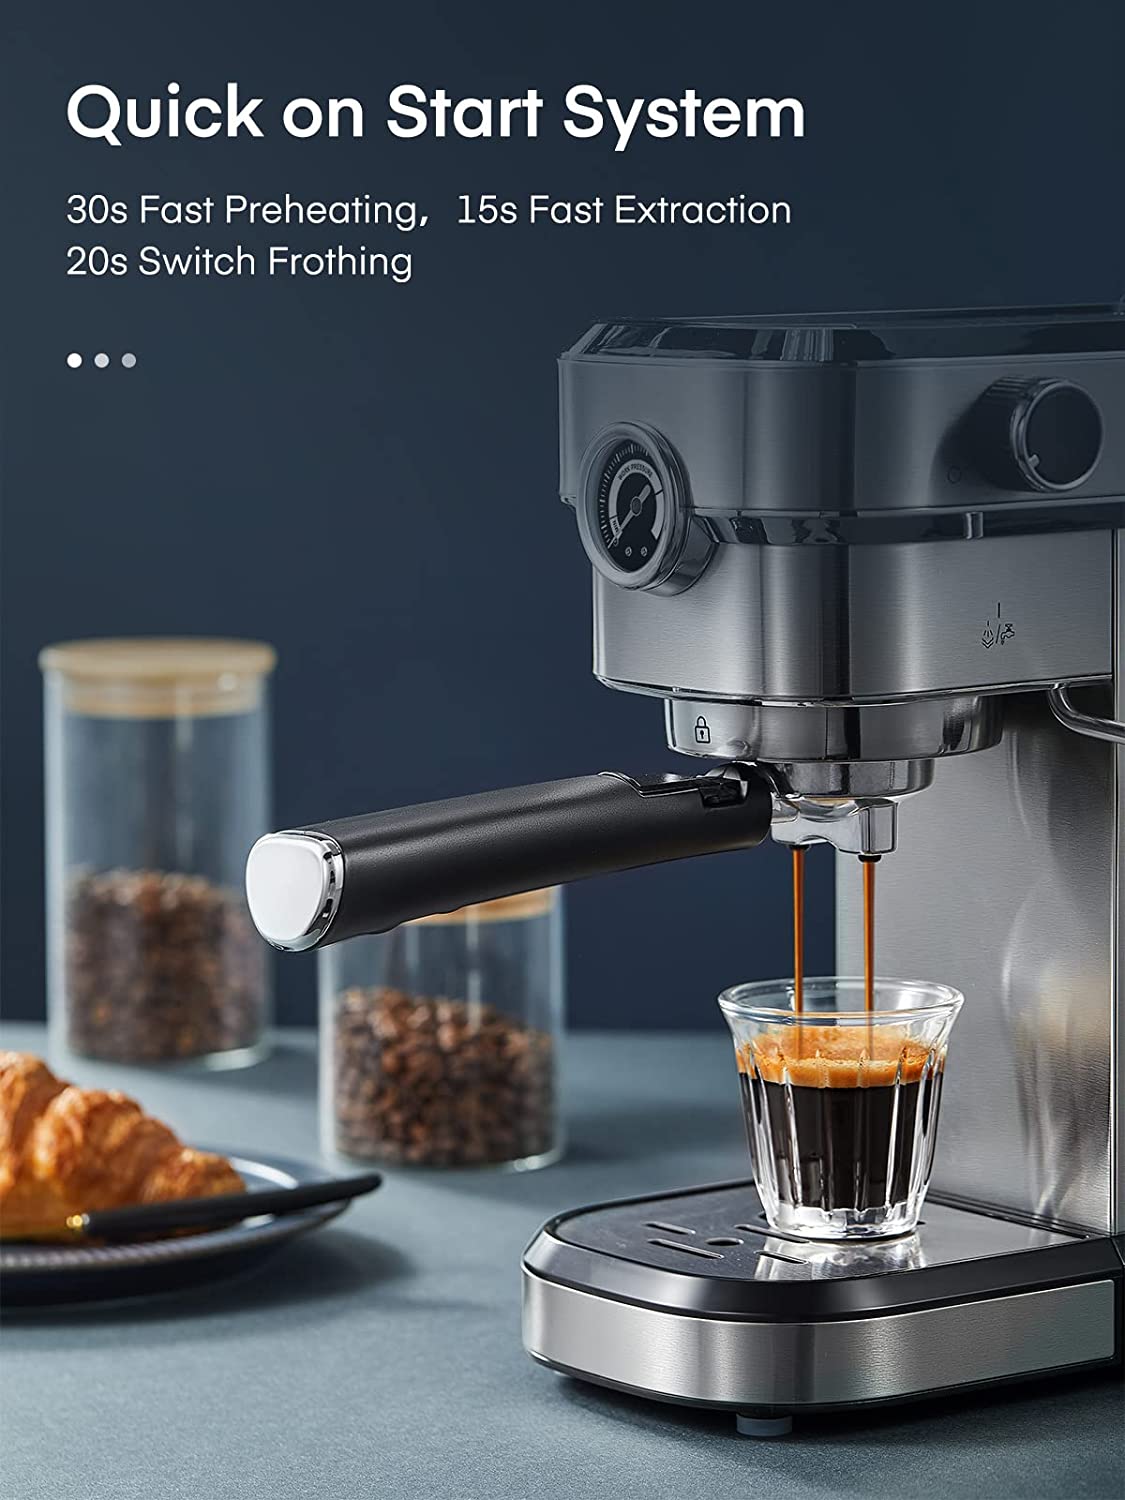 quick on start system, FOHERE Espresso Machine, 15 Bar Espresso and Cappuccino Maker with Milk Frother Steam Wand, Professional Compact Coffee Machine for Espresso, Cappuccino, Latte and Mocha, Brushed Stainless Steel